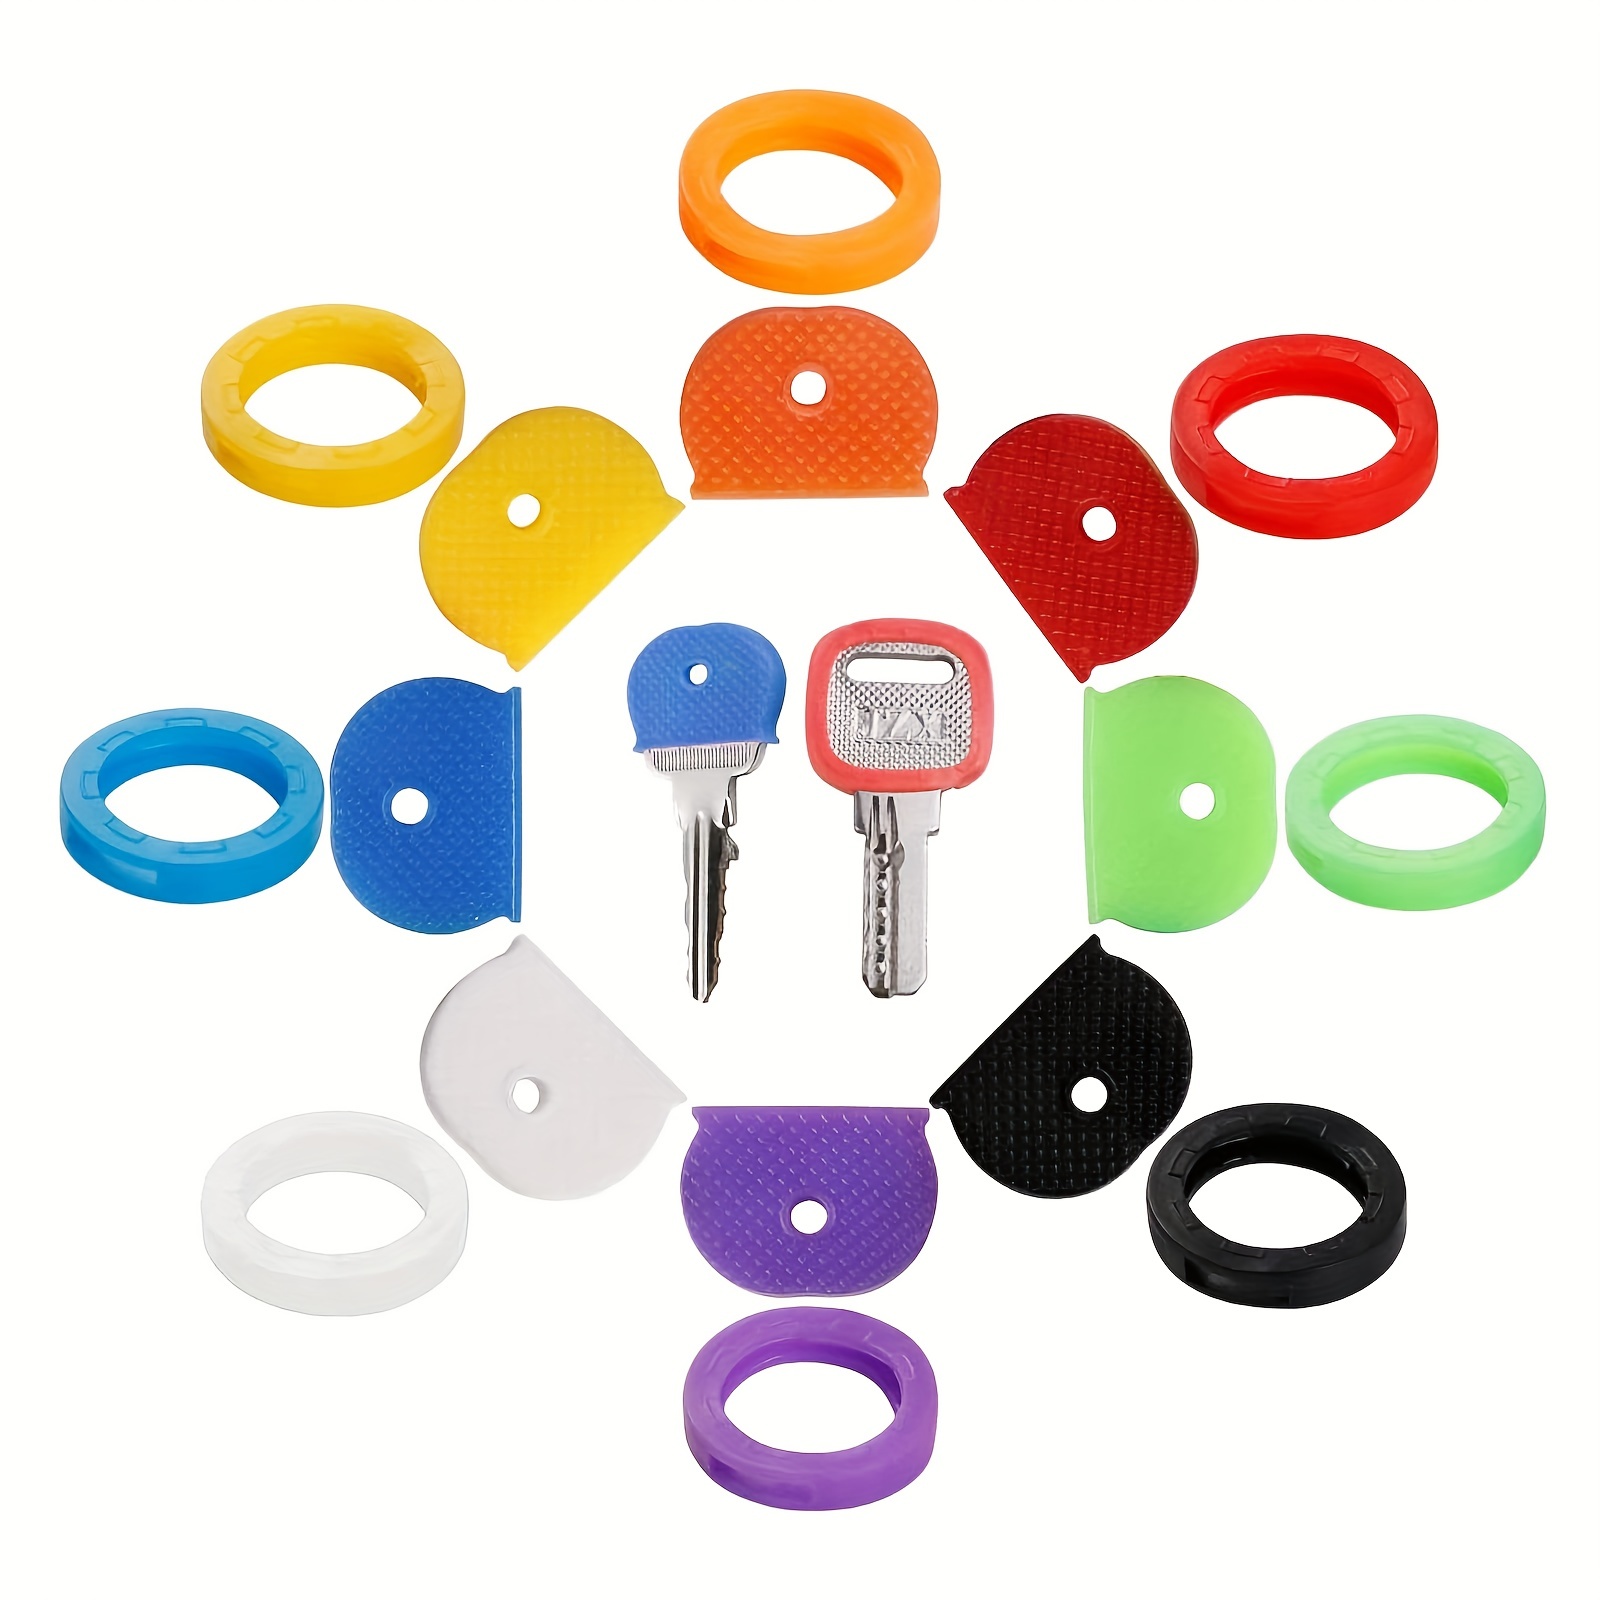 

16/32pcs Key Caps Covers Tags, Key Cap & Key Ring Combination, Label Id, Perfect Coding System To Identify Your Key In 2 Different Style 8 Assorted Colors